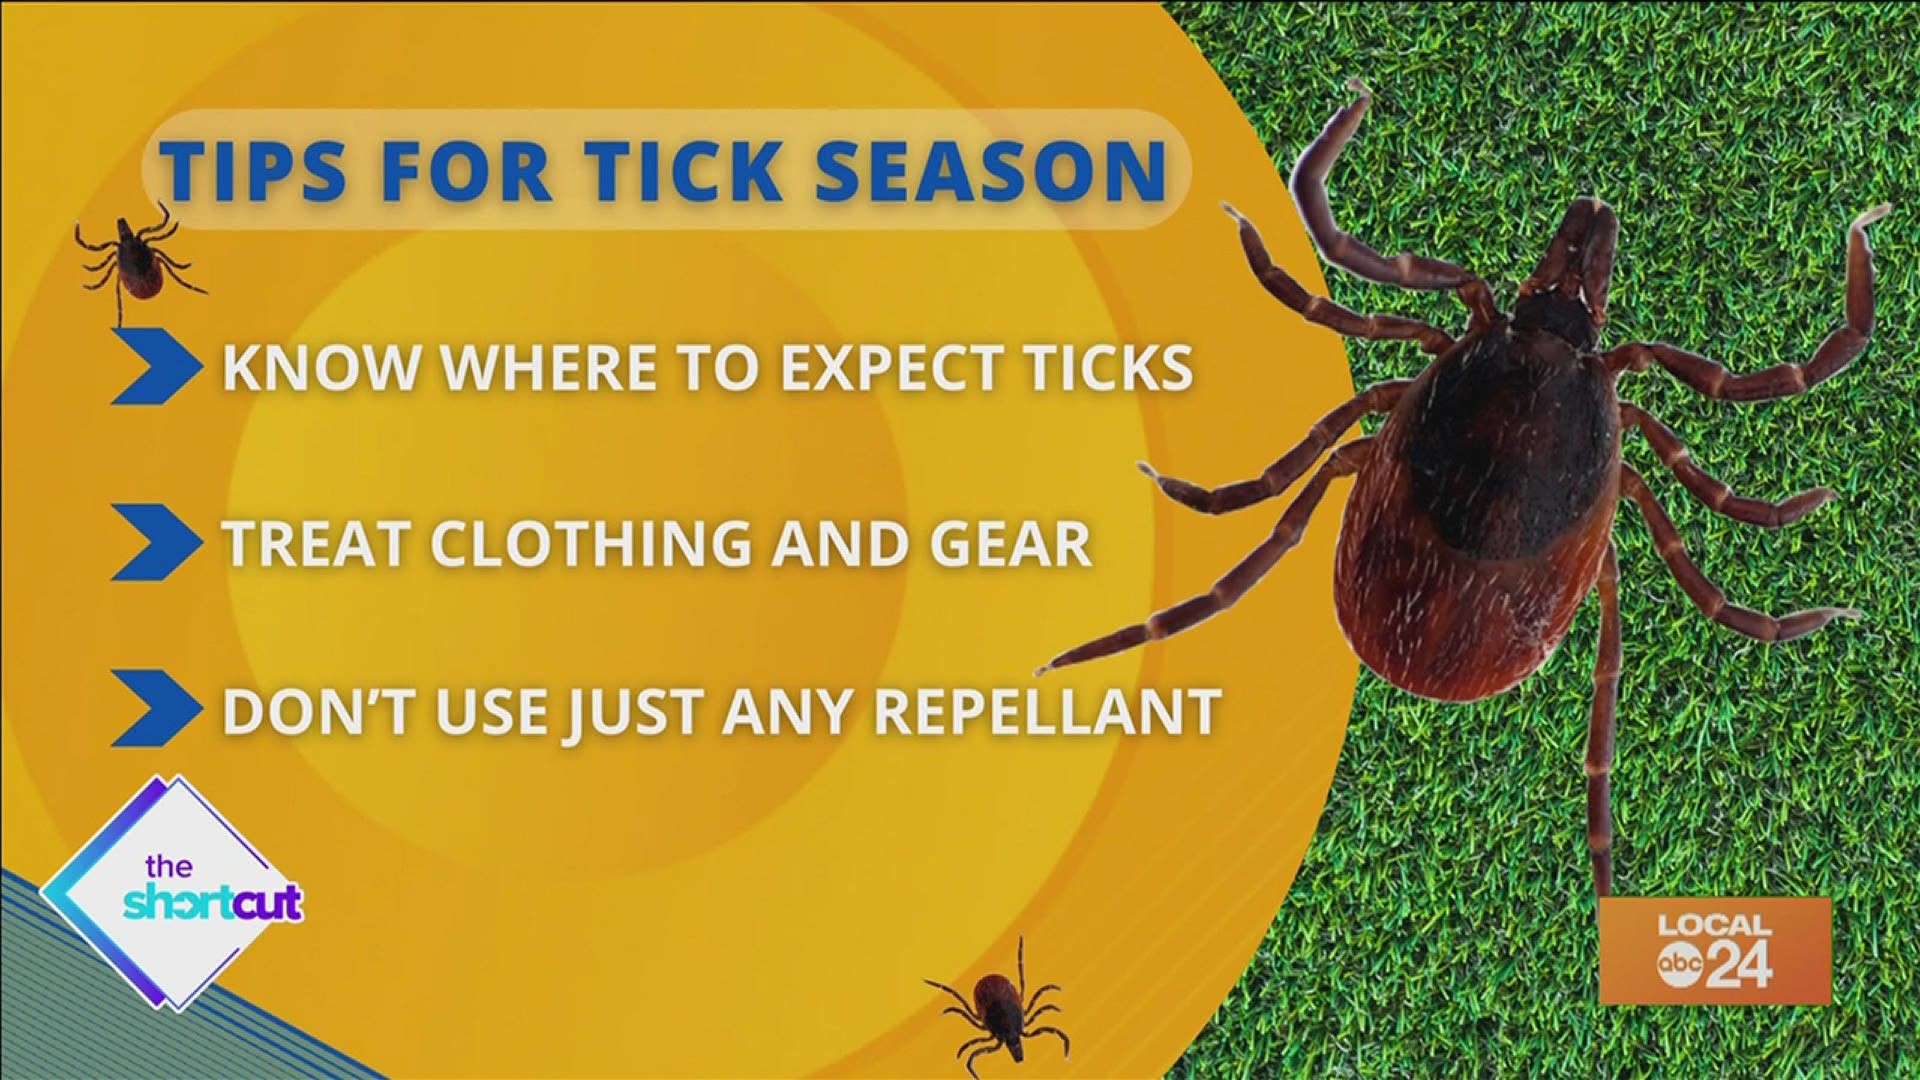 Join Sydney Neely as we take a look at some tips and ticks on how to deal with every animal and human's worst, bloodsucking, forest nightmare - ticks!